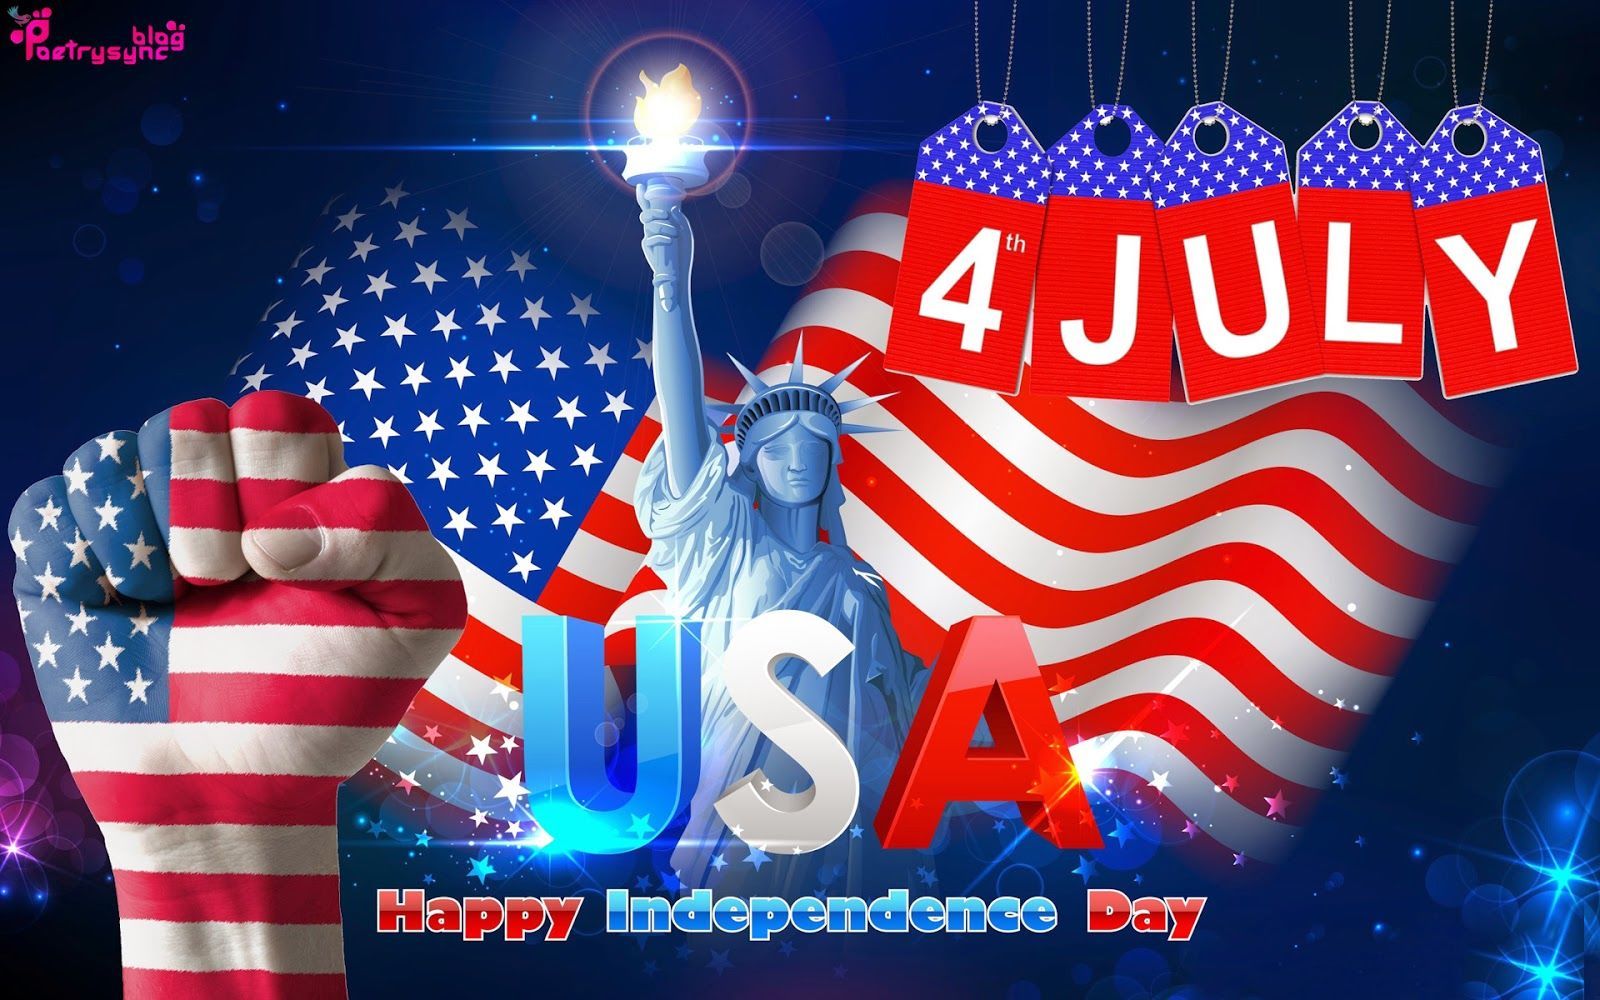 USA Independence Day Picture, Photo, and Image for Facebook